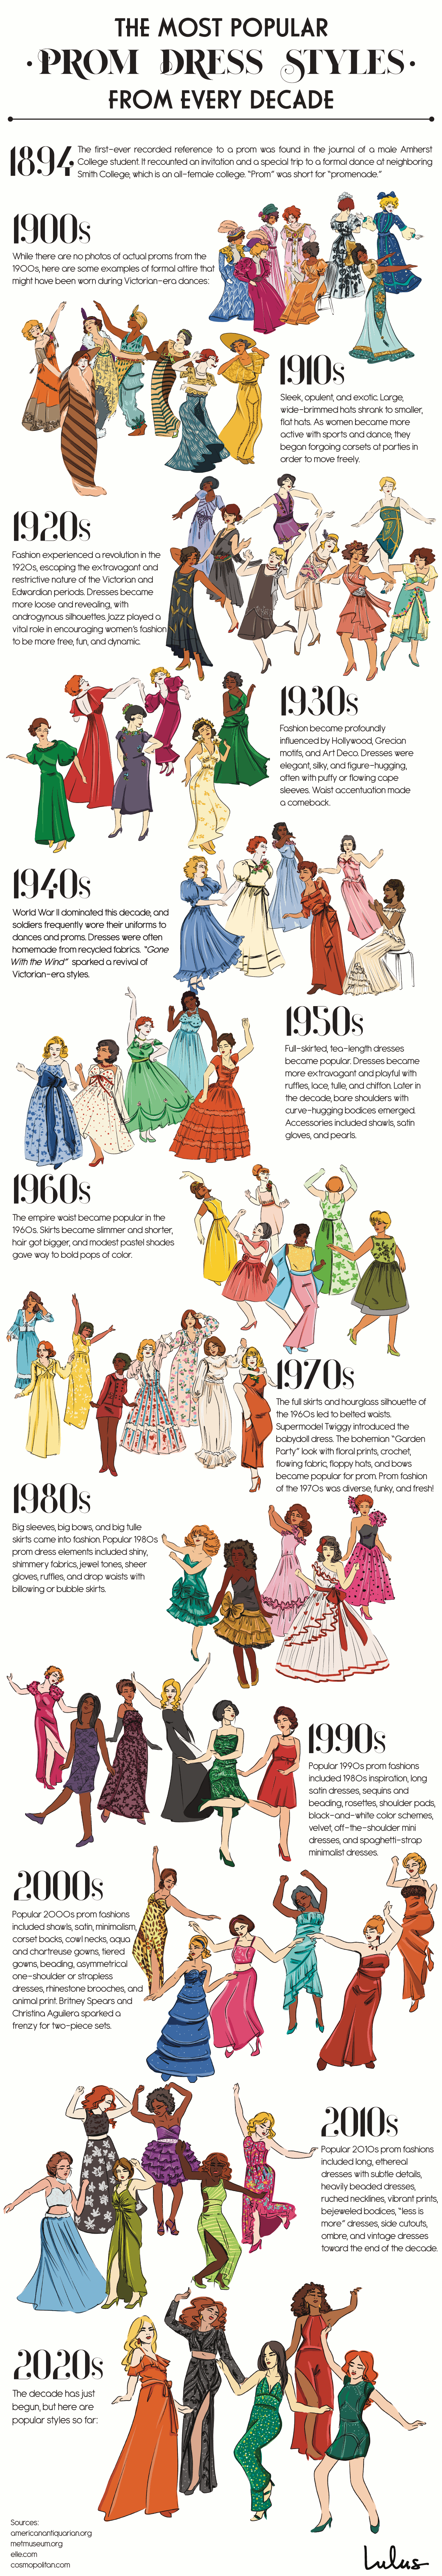 The Most Popular Prom Dress Styles From Every Decade